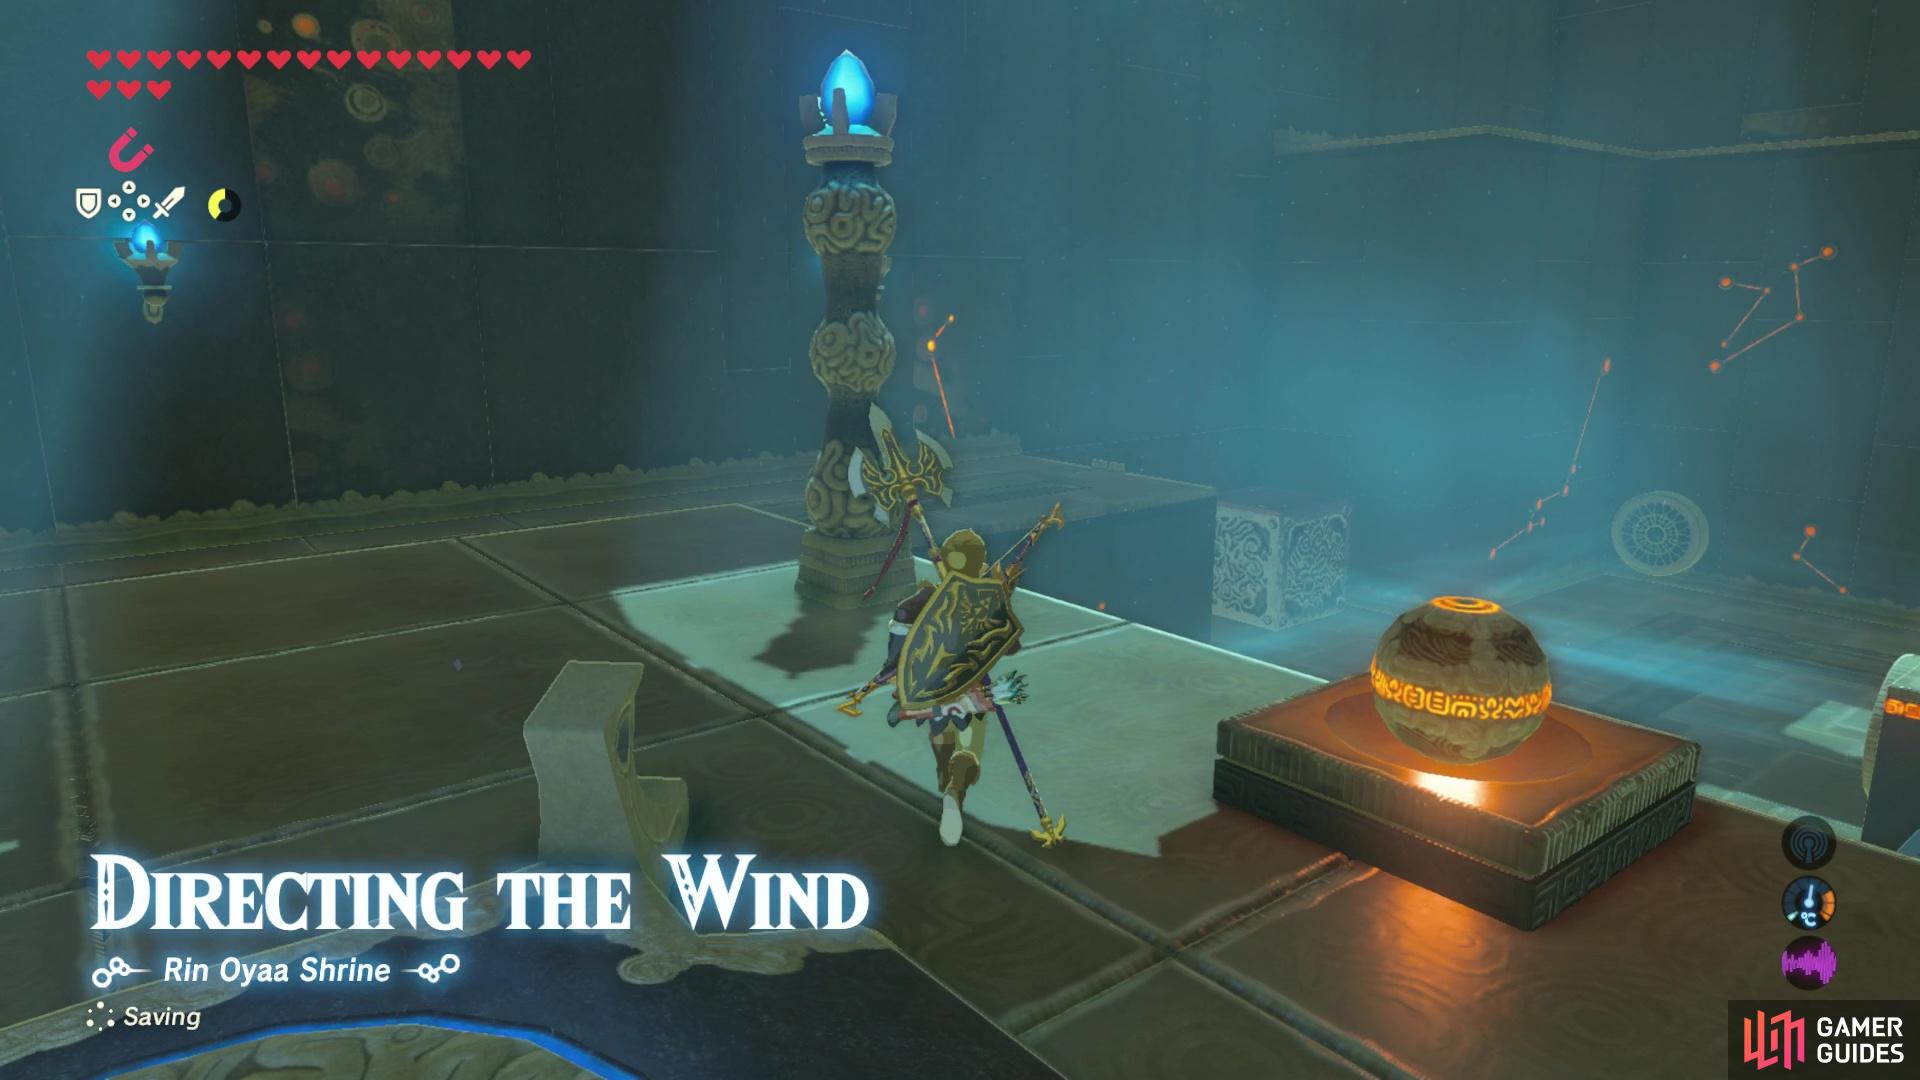 and the aim of the shrine is to use the wind streams to roll the ball into the hole!